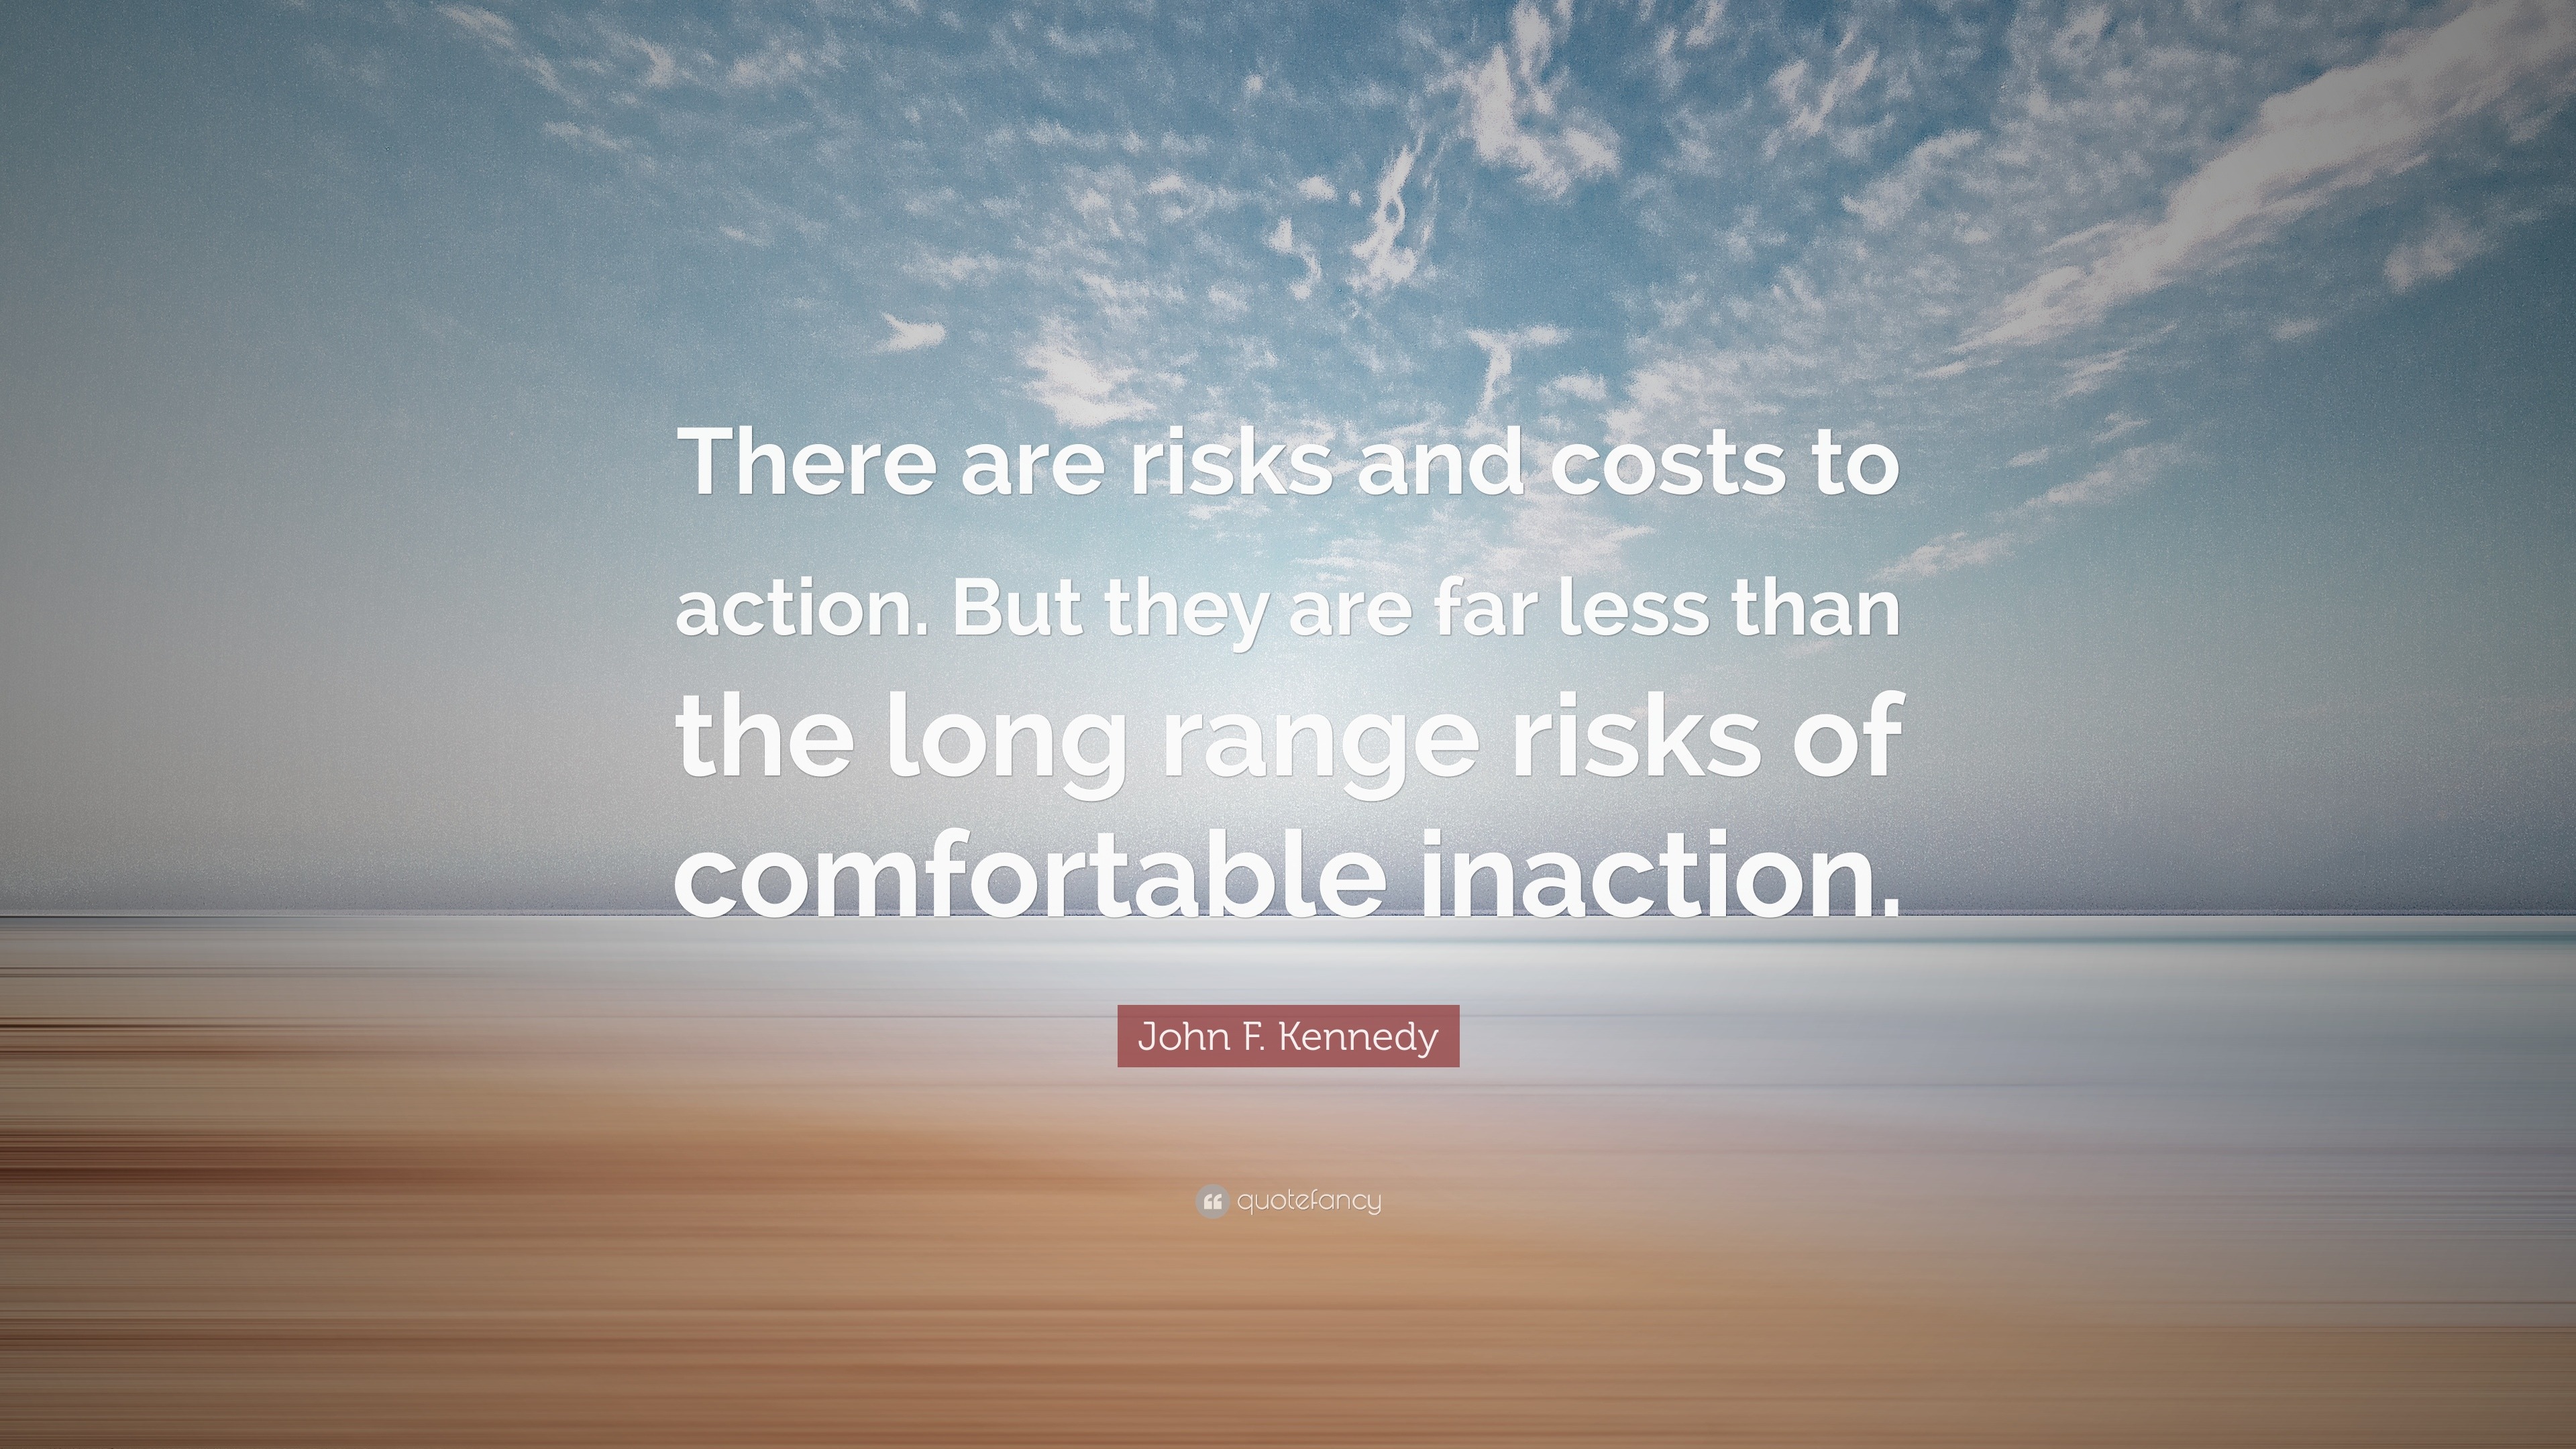 John F. Kennedy Quote: “There are risks and costs to action. But they